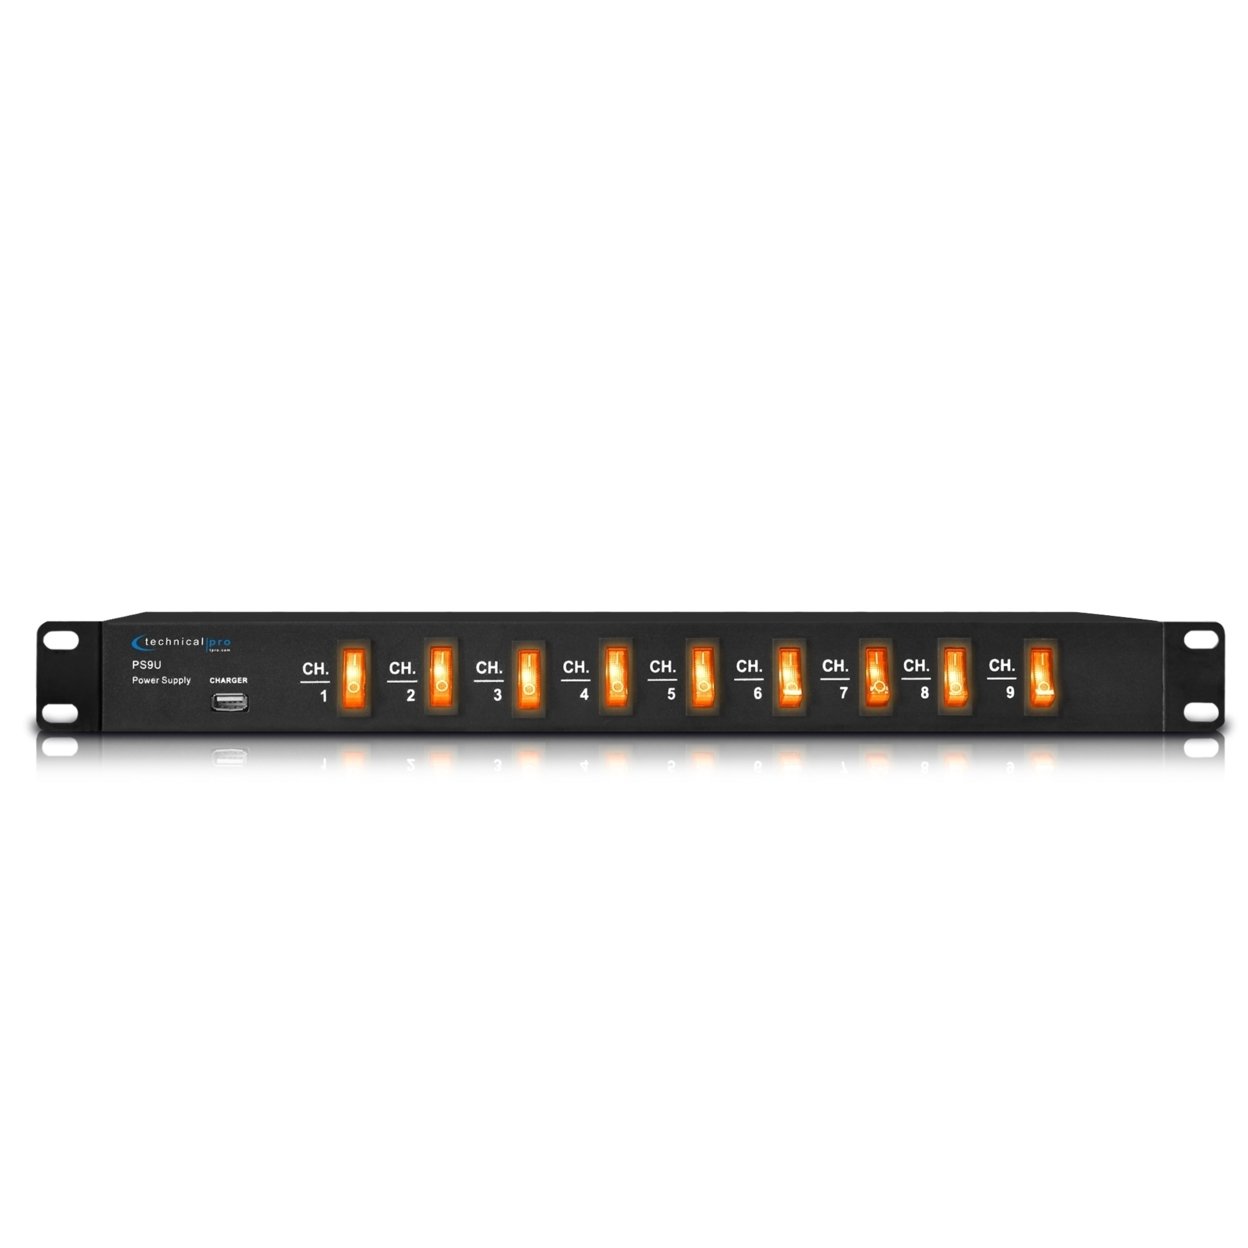 New Technical Pro Rack Mount Power Strip With 5V USB Charging Port & 9 Switches, Max Load 1800 Watts